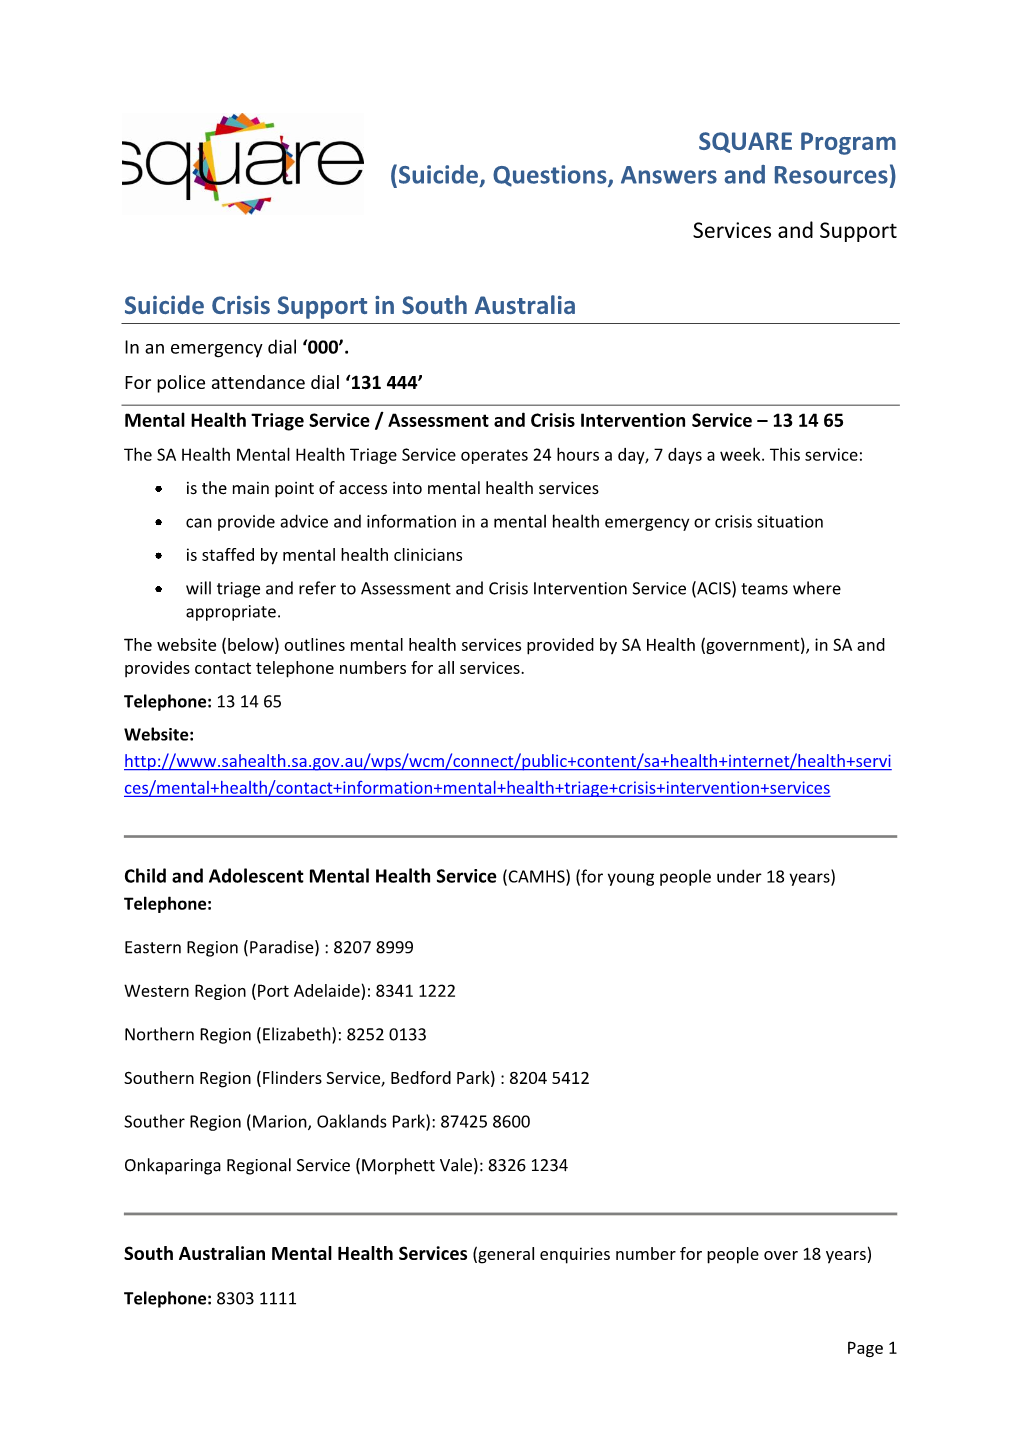 Mental Health Triage Service / Assessment and Crisis Intervention Service – 13 14 65 the SA Health Mental Health Triage Service Operates 24 Hours a Day, 7 Days a Week